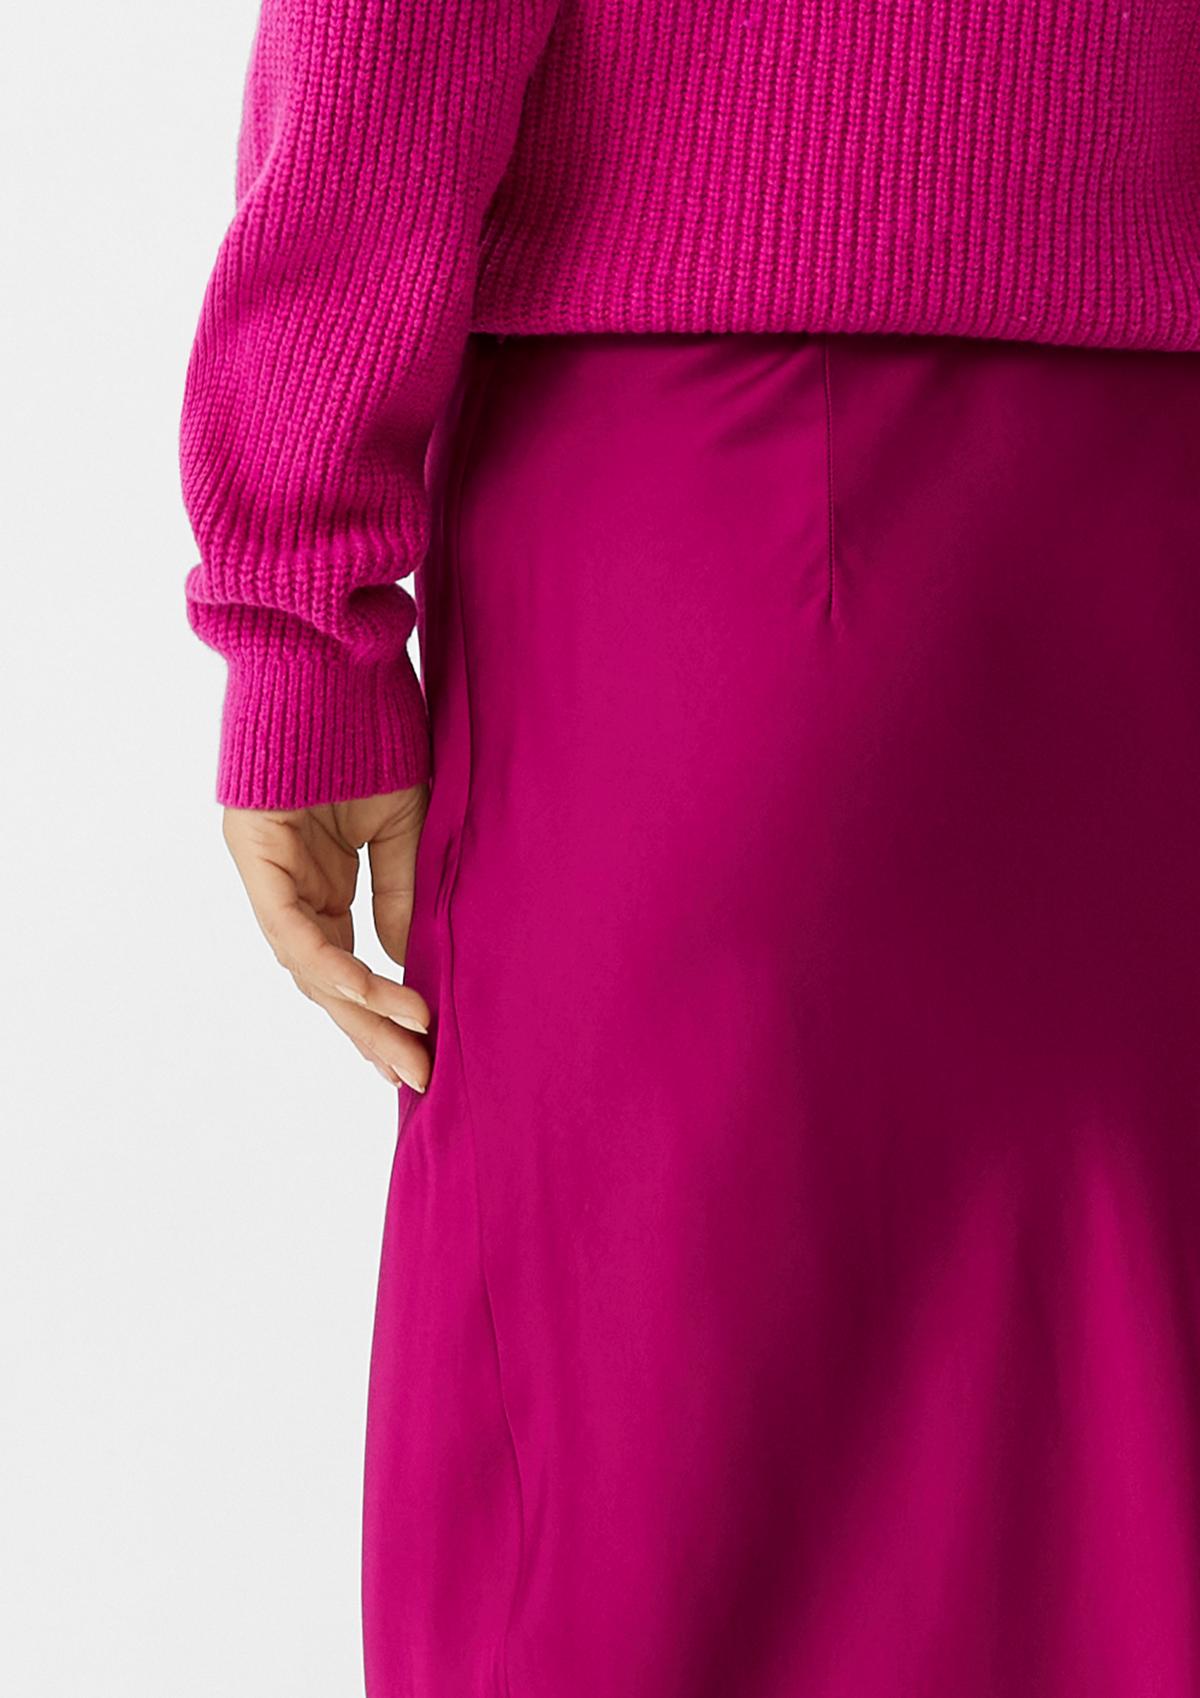 Satin skirt made of pure viscose - pink | Comma